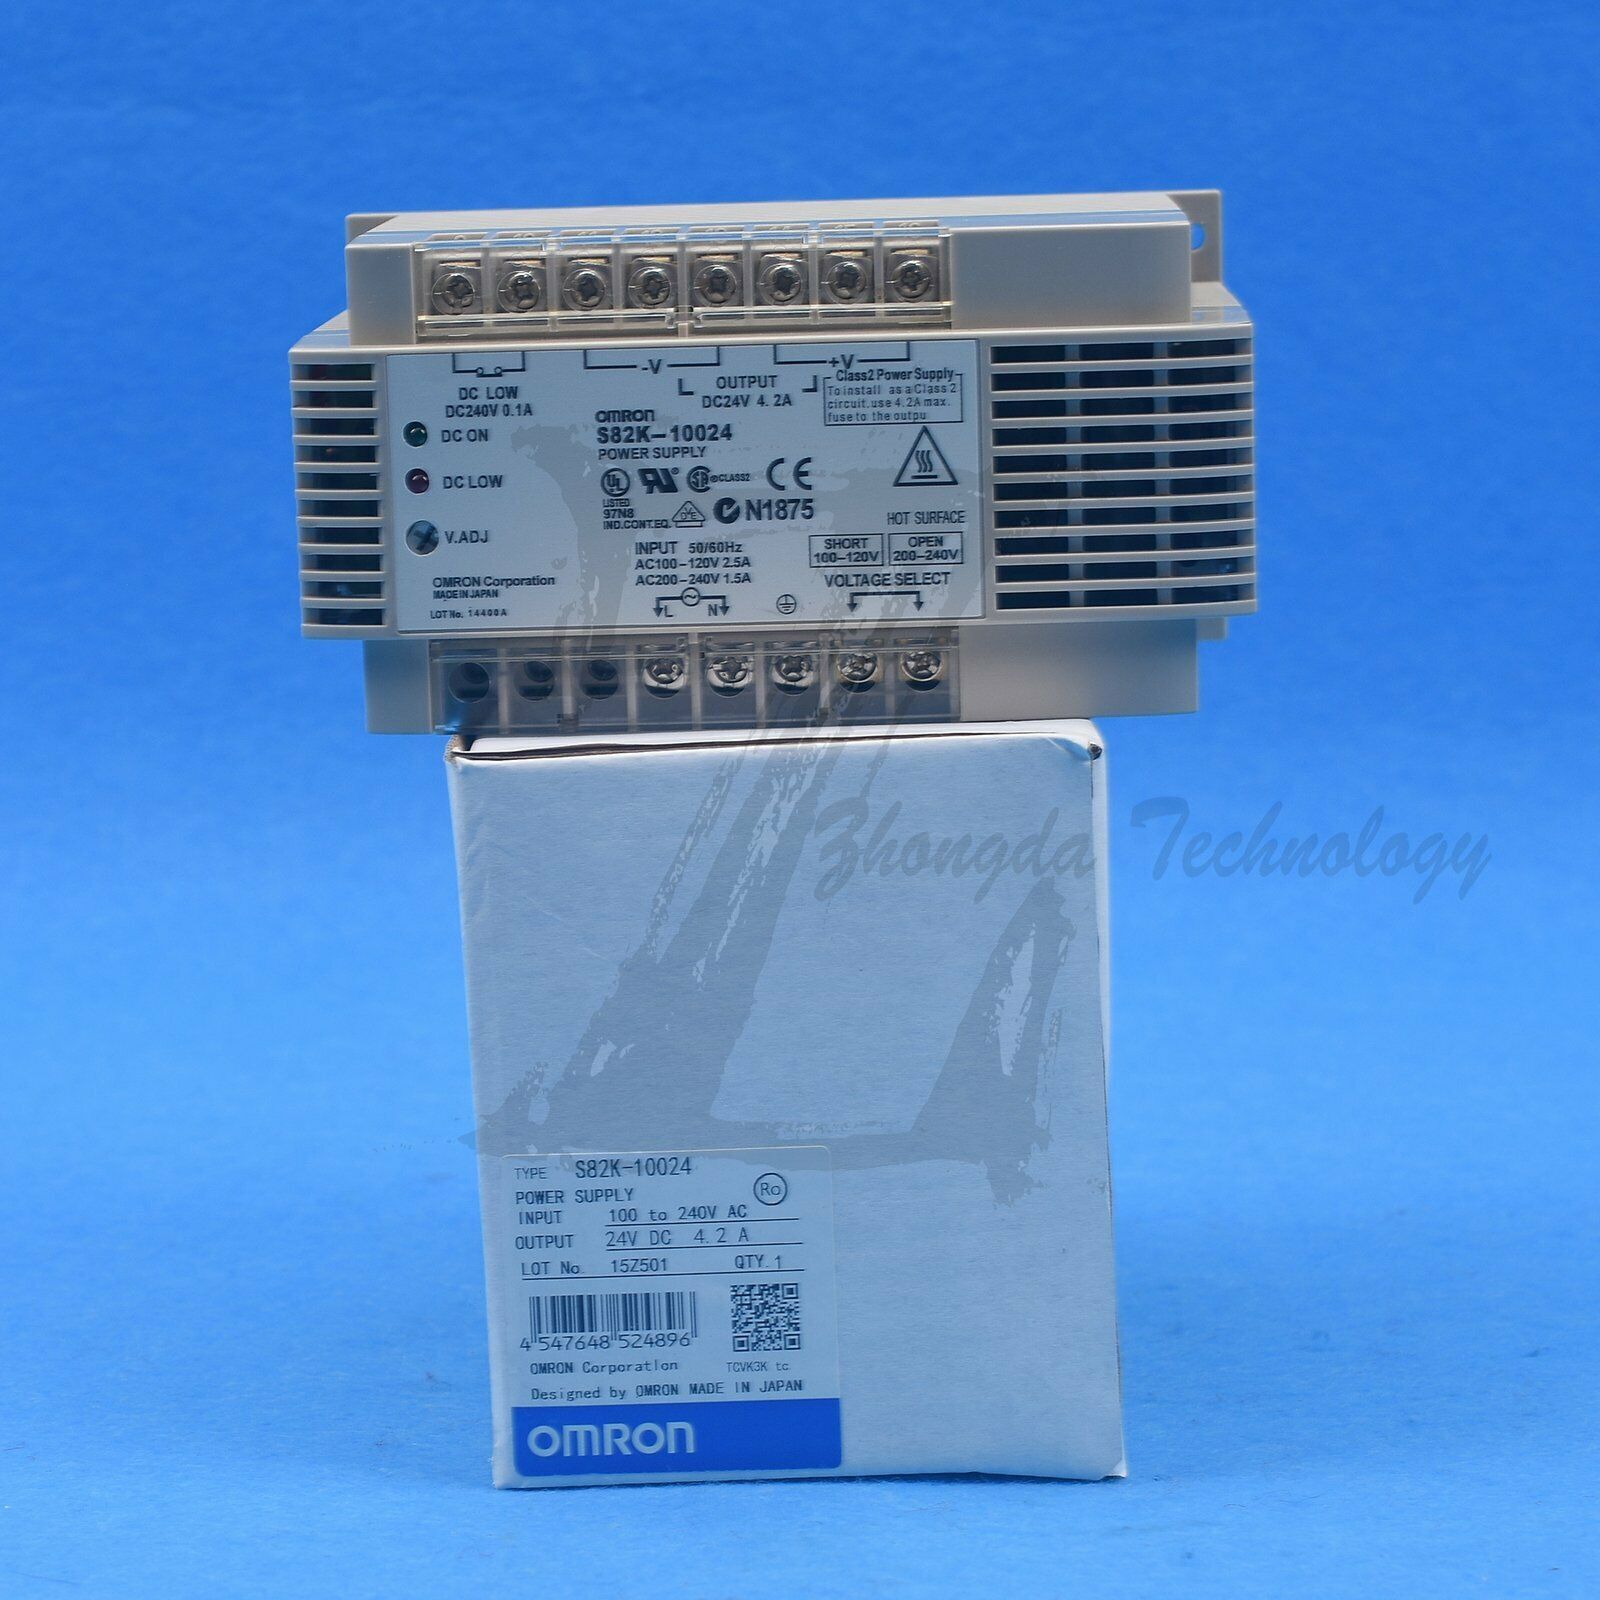 1PC New Omron Power Supply S82K-10024 24VDC 4.2A One year warranty KOEED $101-200, 90%, import_2020_10_10_031751, OMRON, PLC, S82K